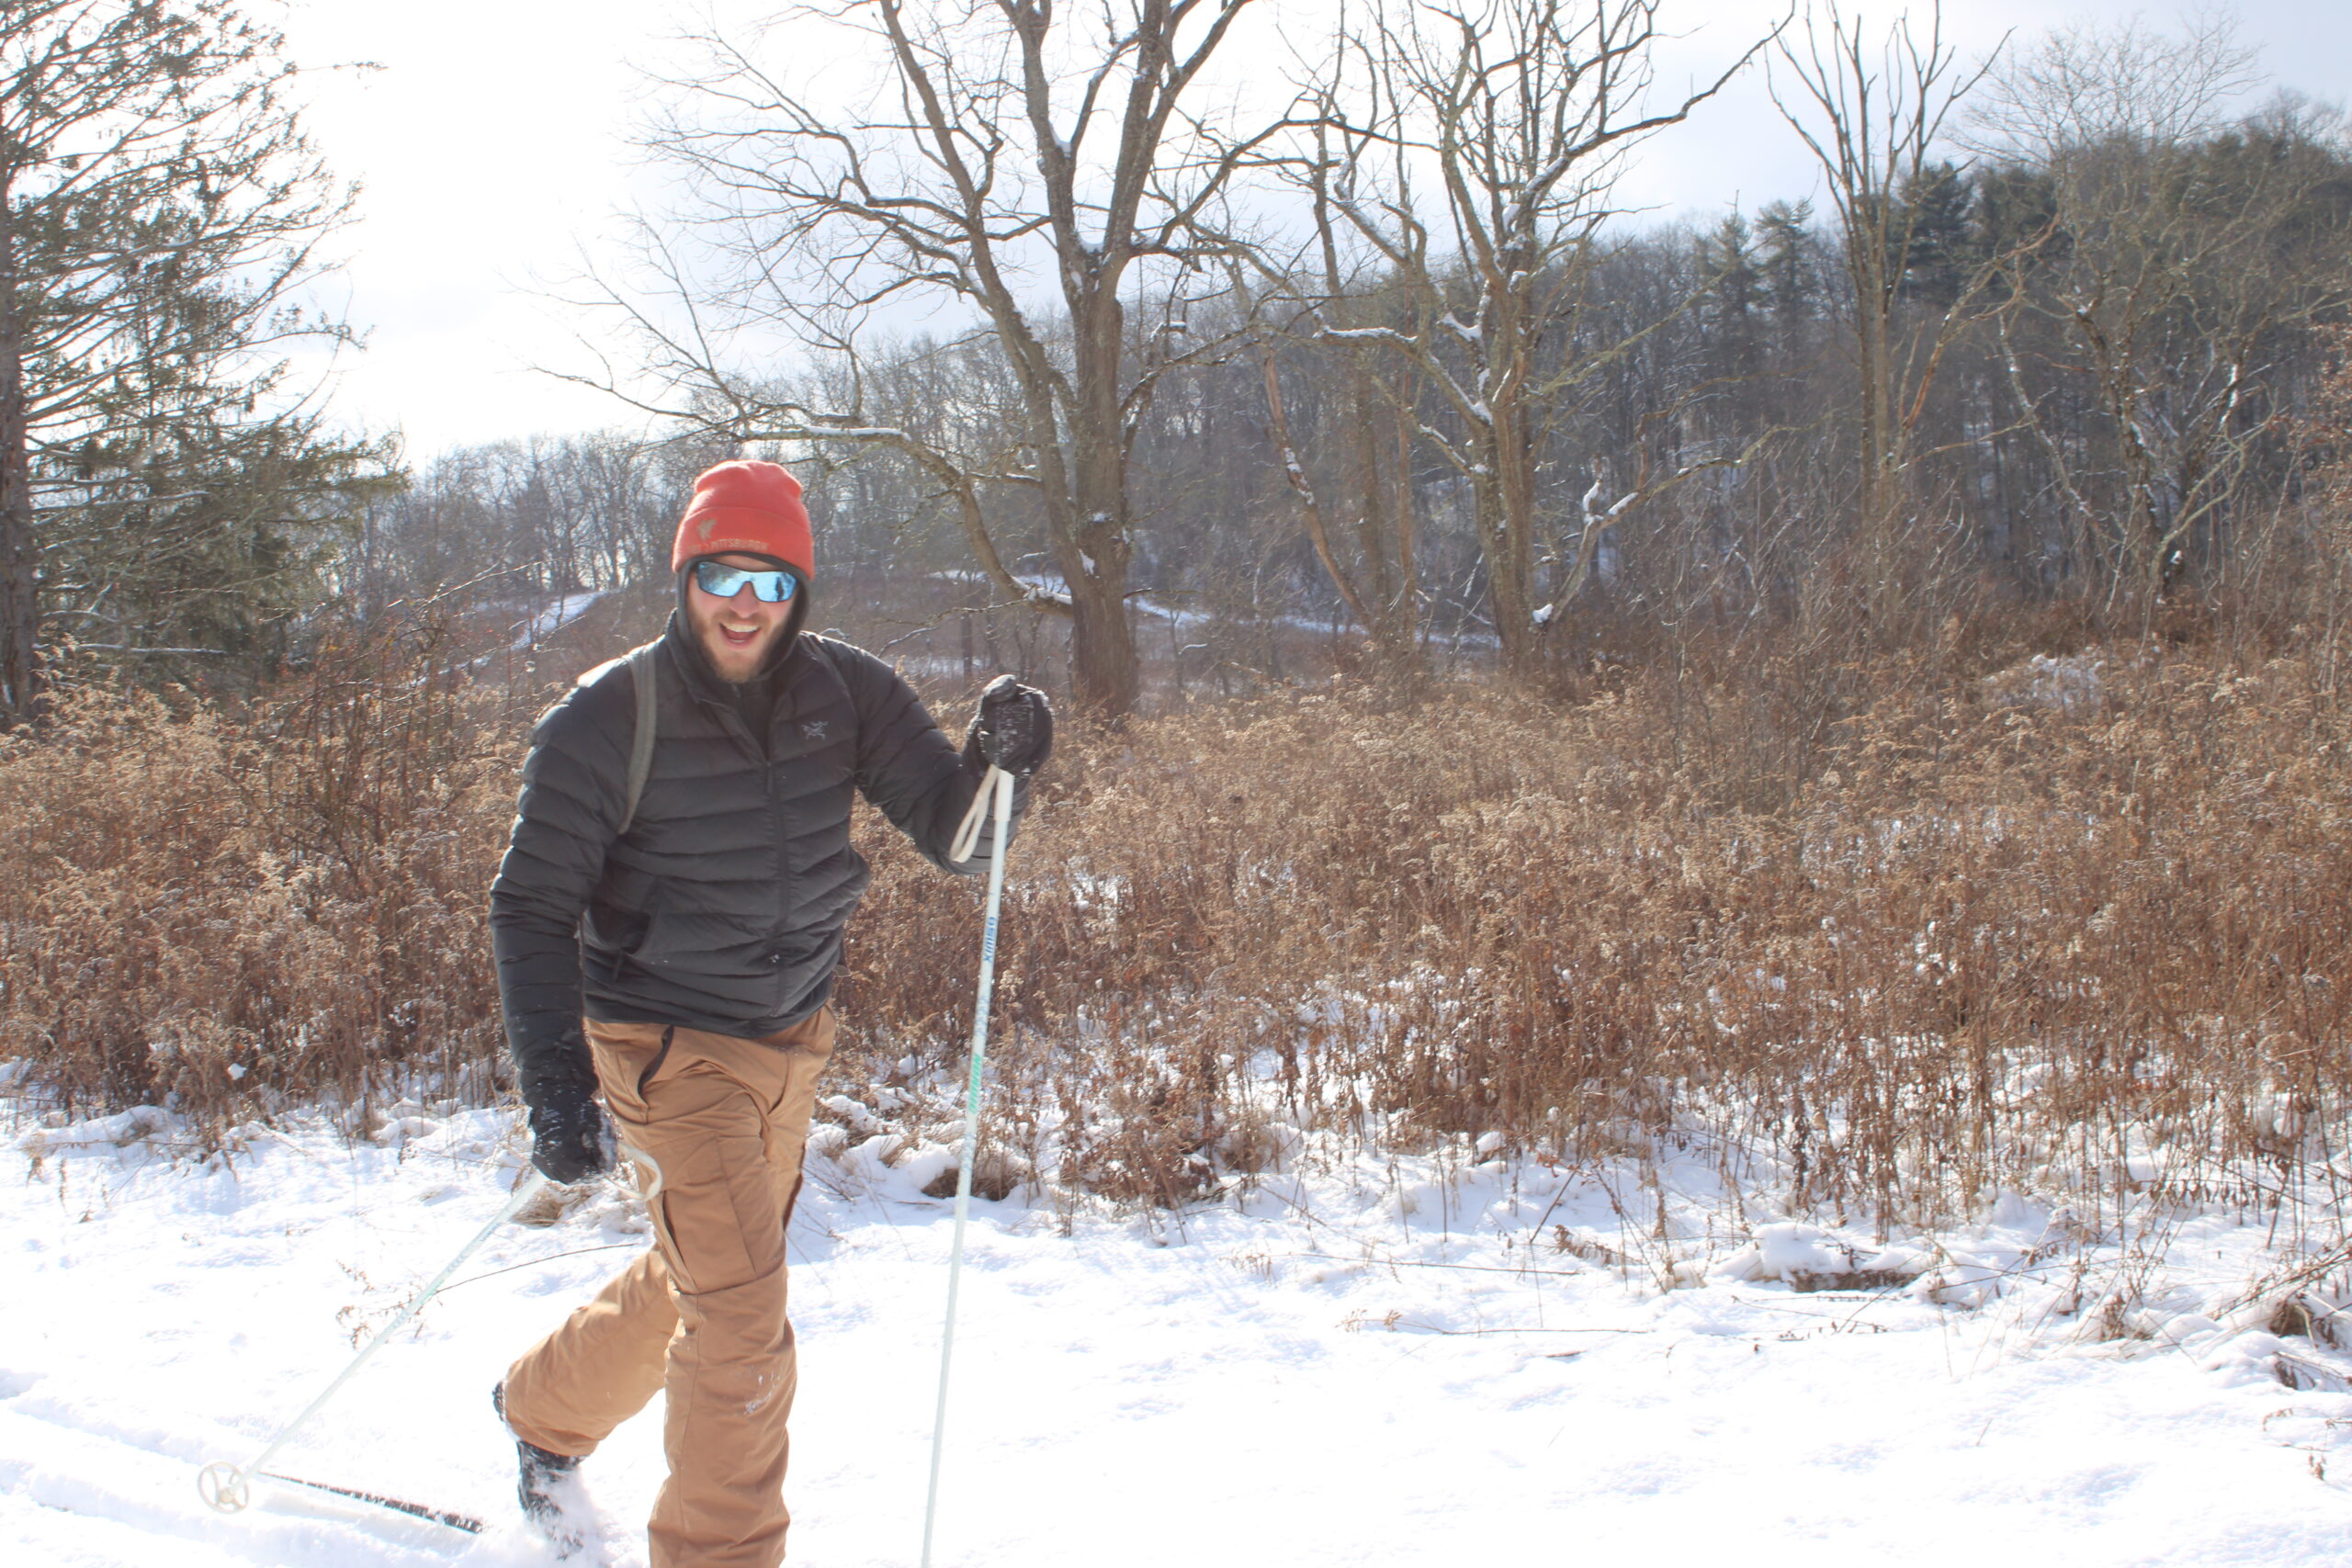 Man cross-country skiing on a snowy meadow trail